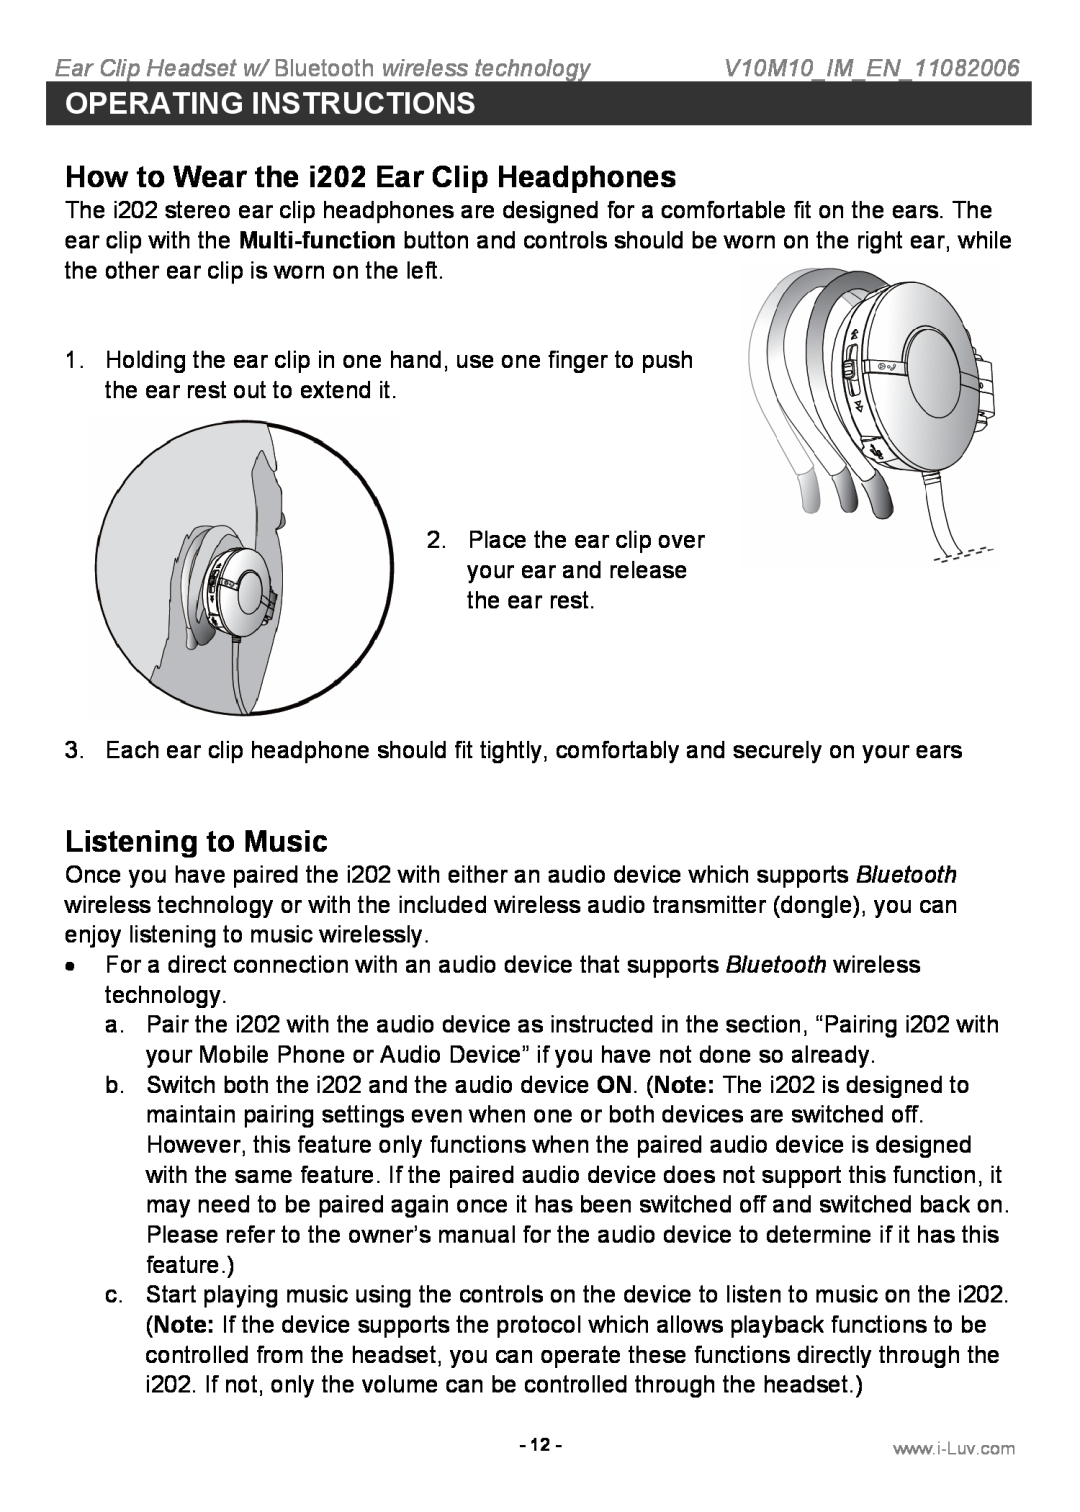 Iluv instruction manual How to Wear the i202 Ear Clip Headphones, Listening to Music, Operating Instructions 